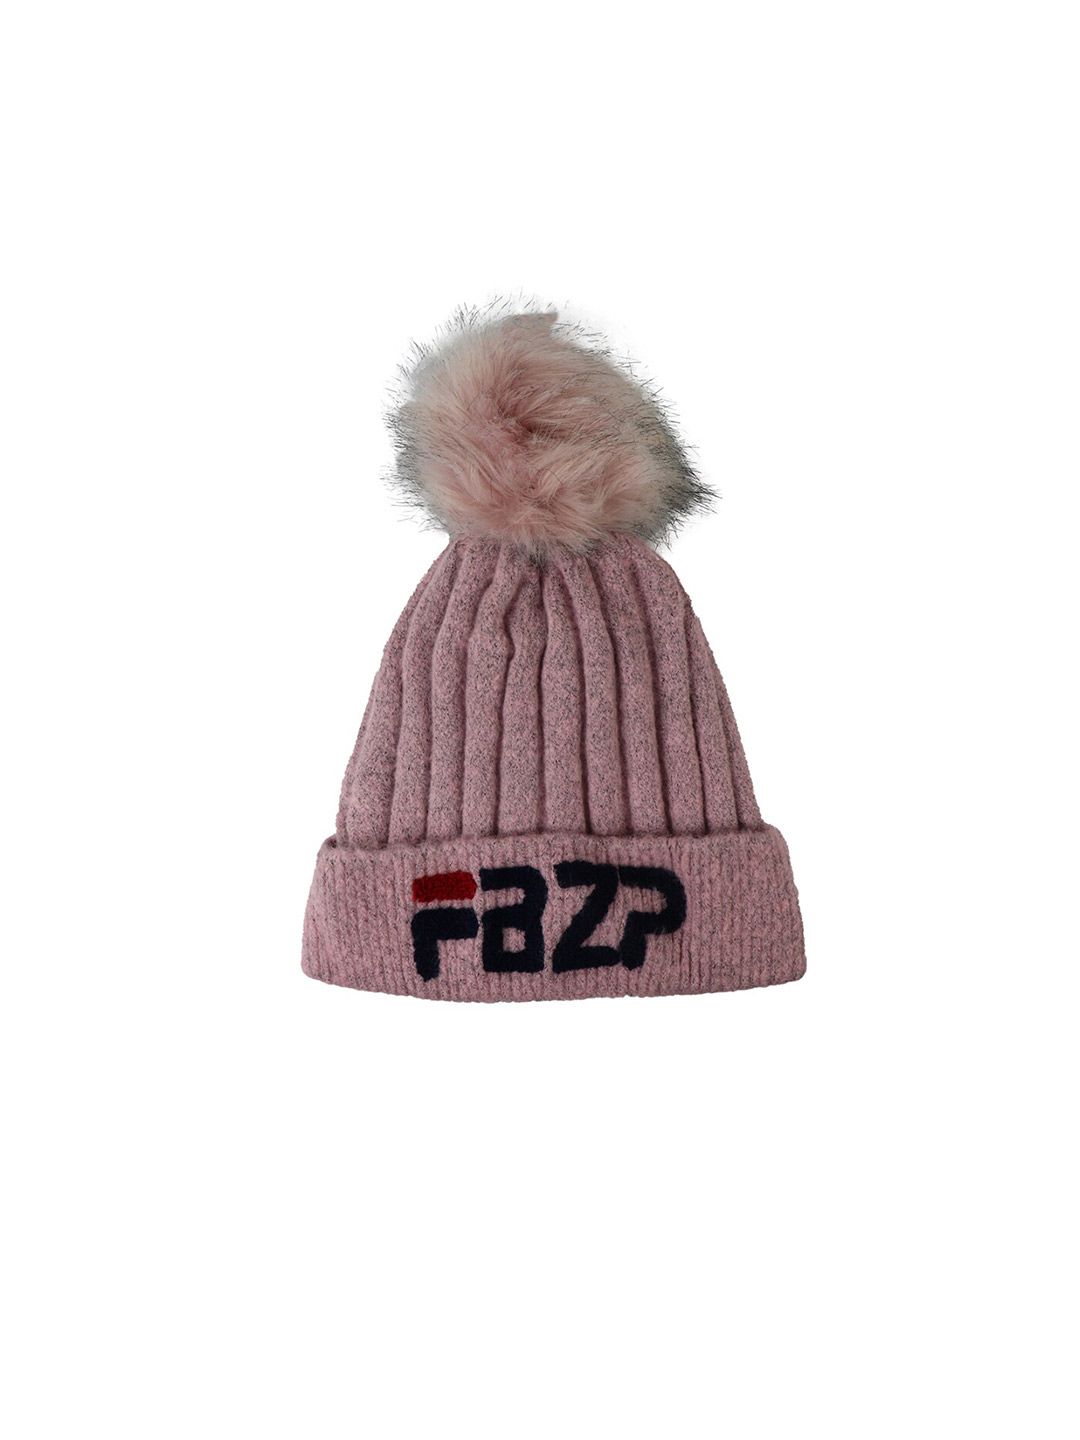 iSWEVEN Unisex Pink Wool Beanie Price in India